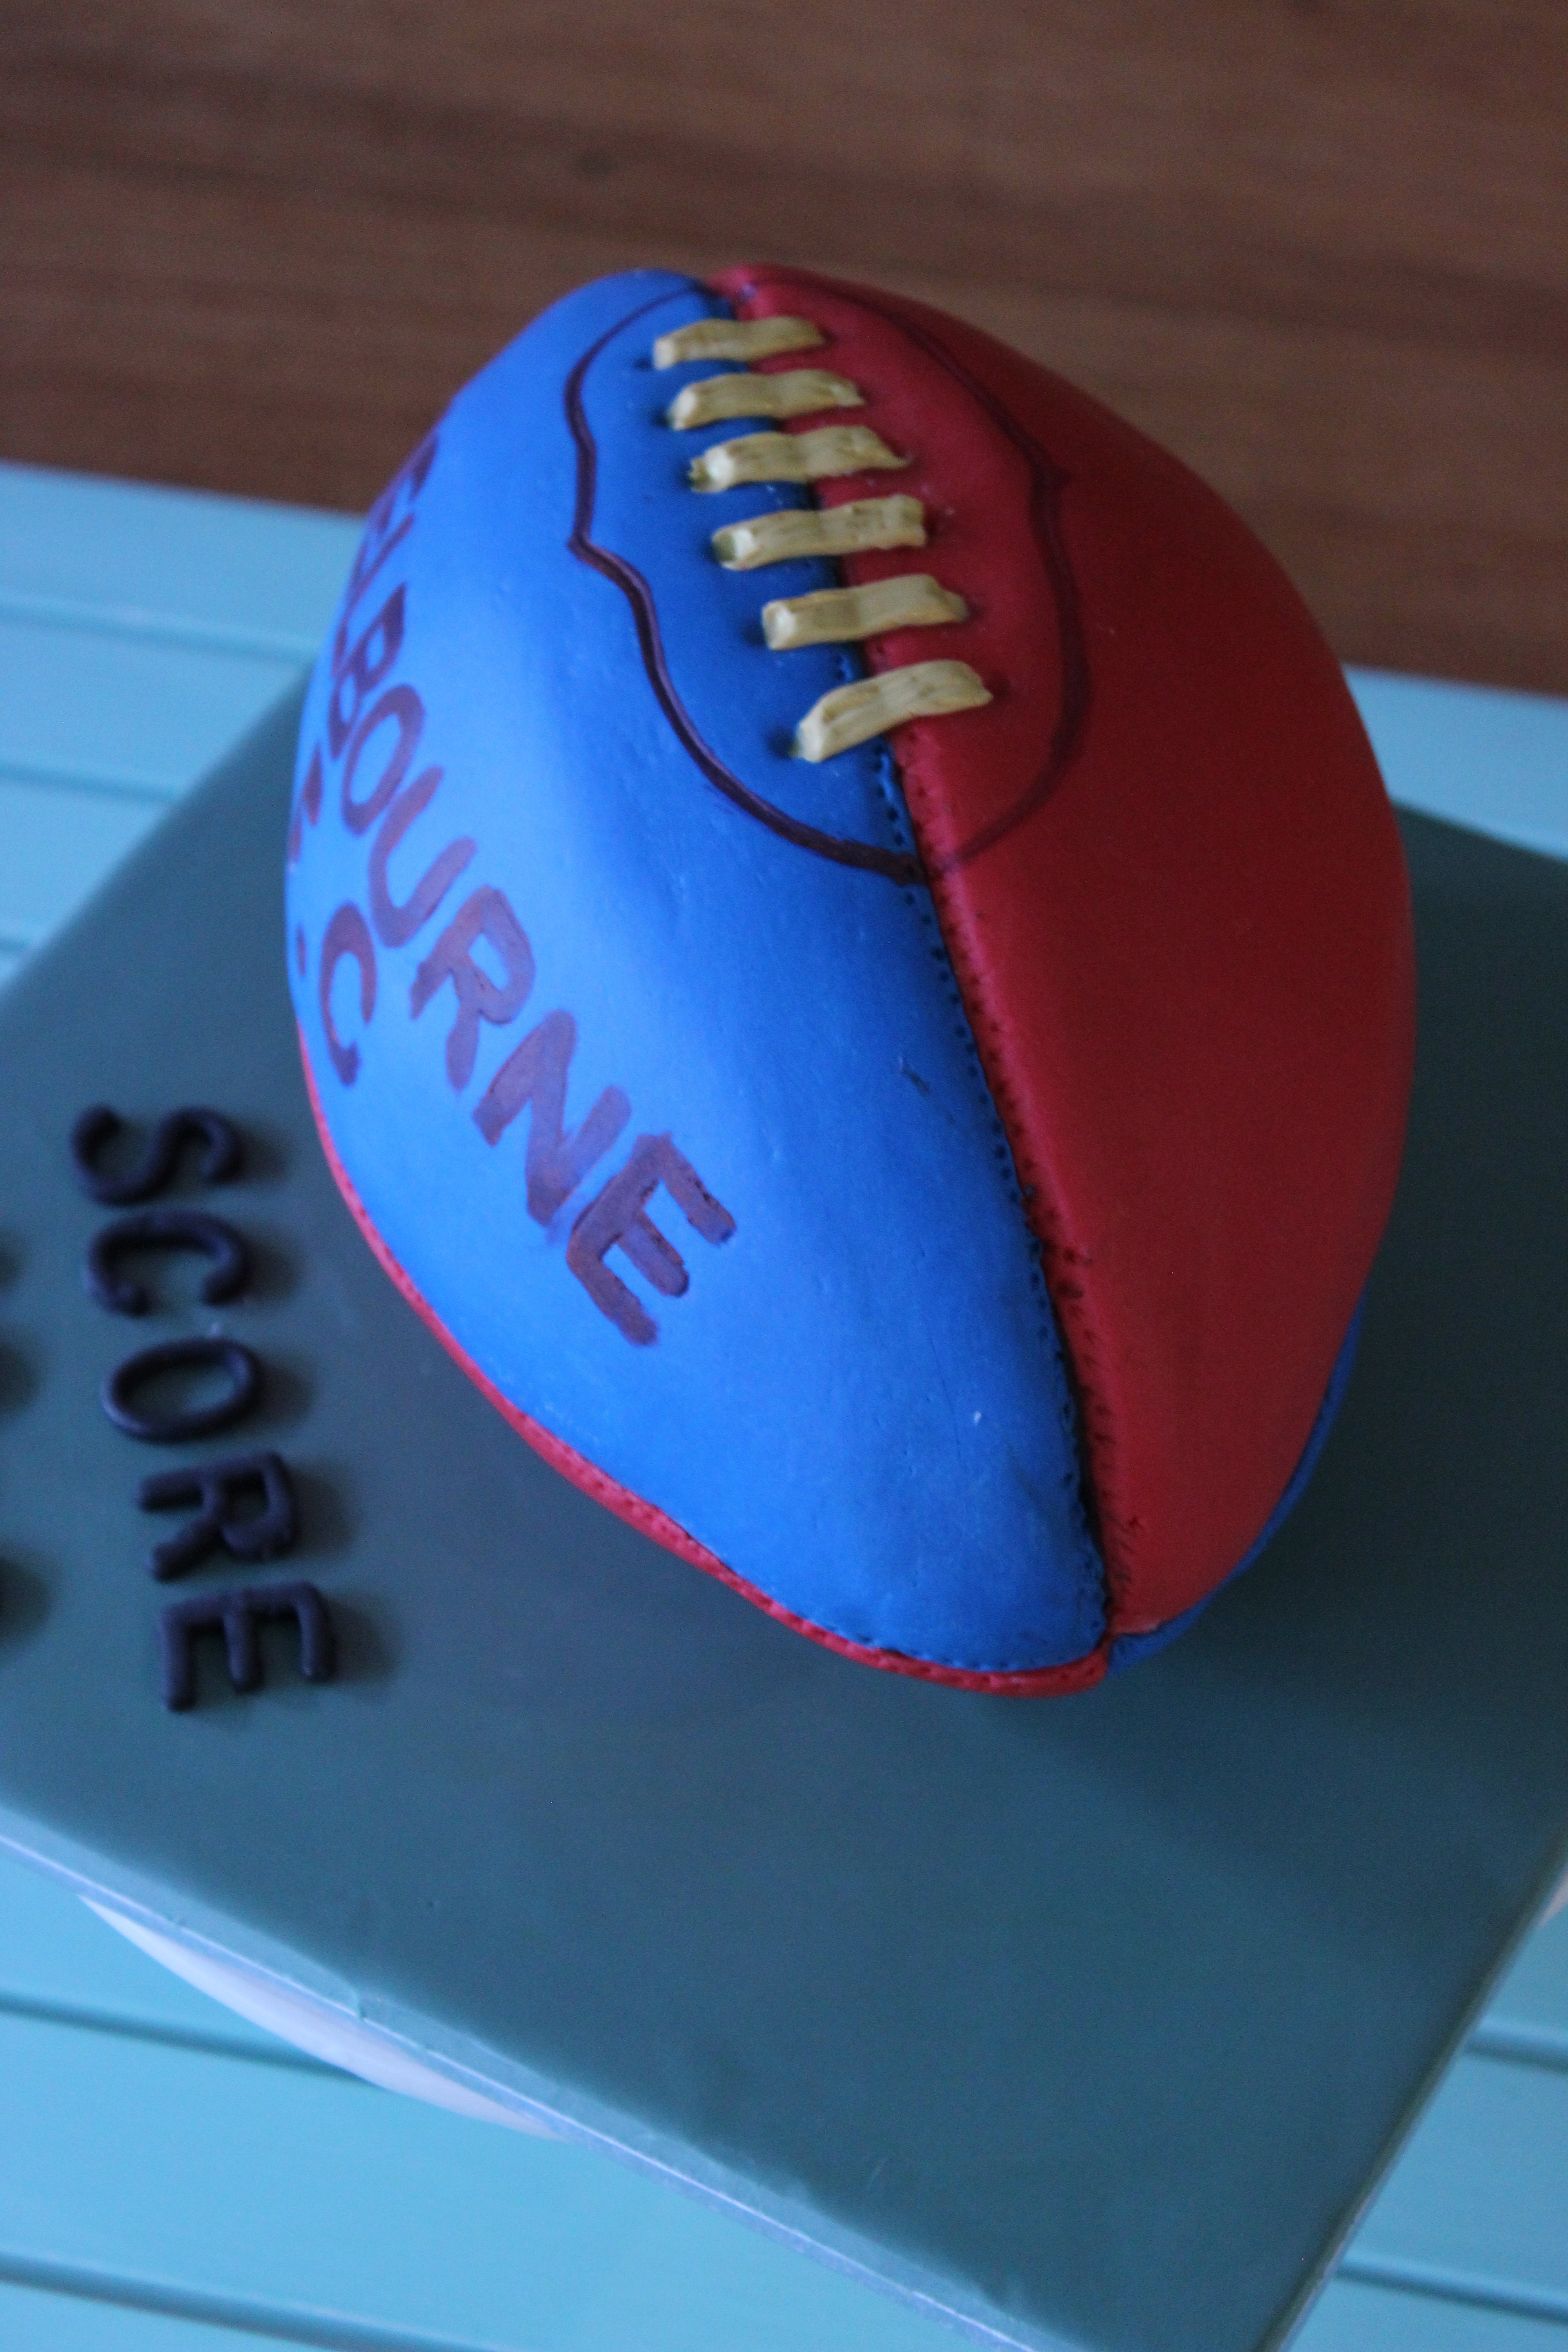 AFL Birthday Cake with edible name plaque and club logo